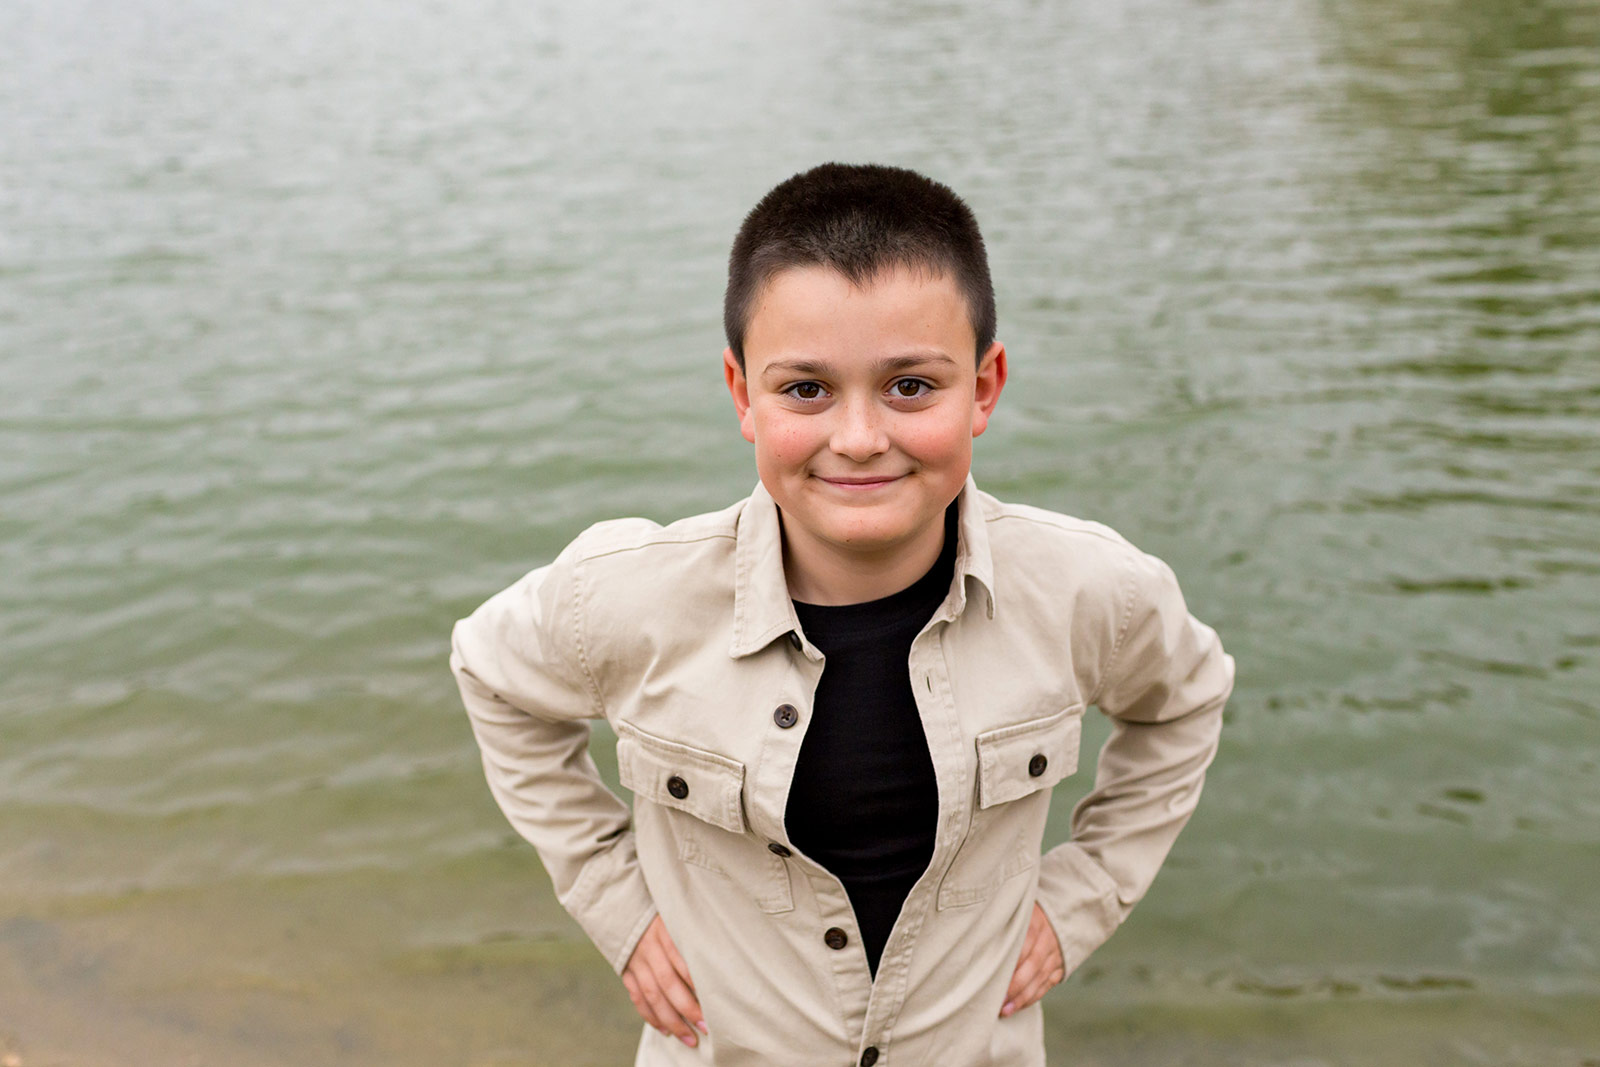 Eli poses confidently for a portrait with the soft shades of the water for a backdrop.